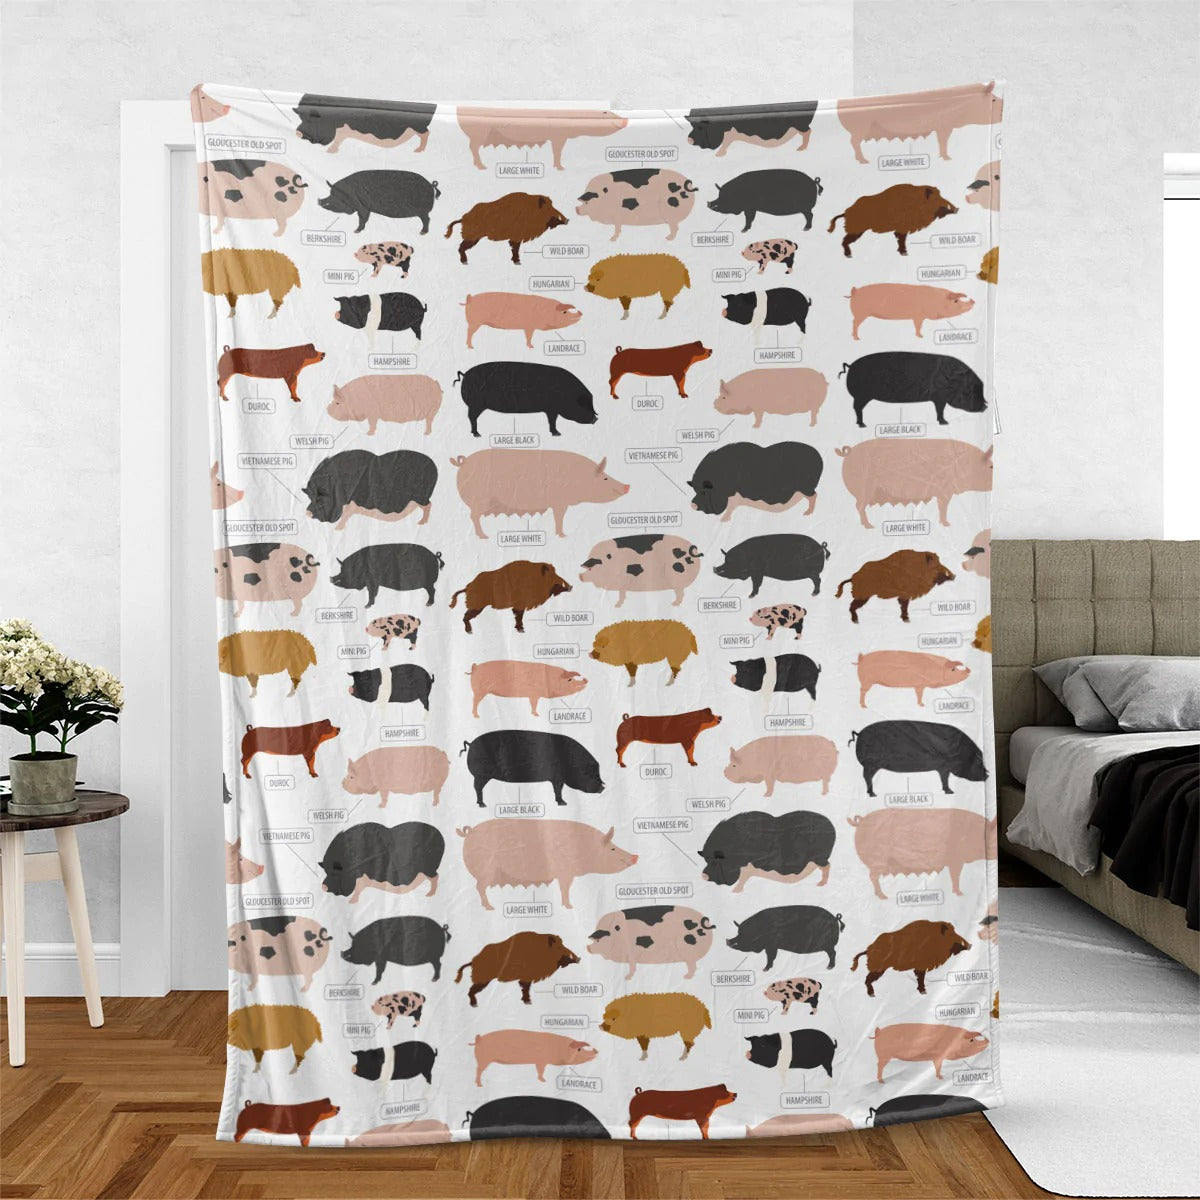 Gift For Baby Kids Throw Pig Breed Pattern Blanket Soft Cozy Warm Cute Baby Blanket Gift For Pig Lover